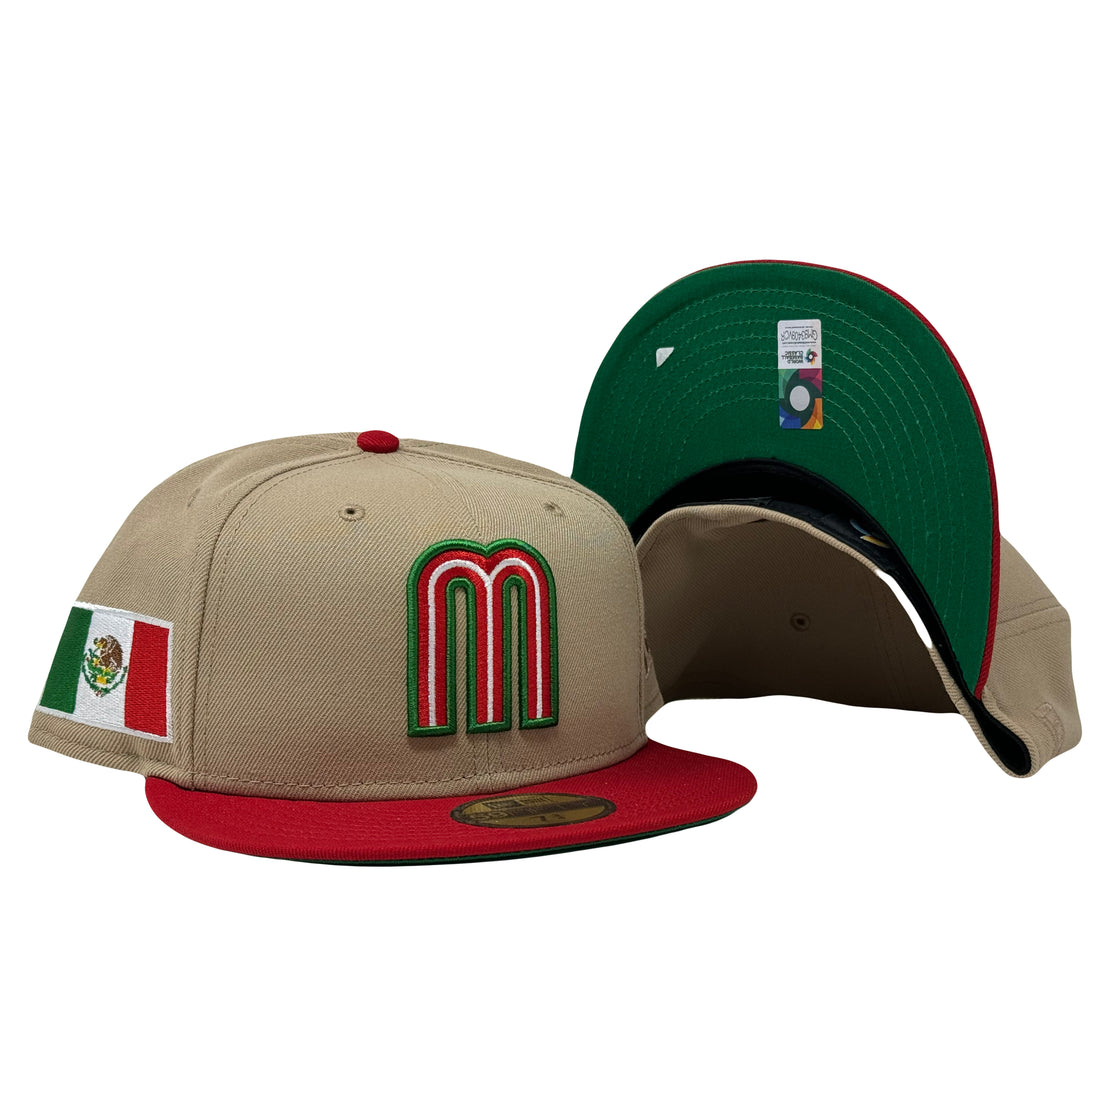 Mexico World Baseball Classic Camel Red Visor 5950 New Era Fitted Hat